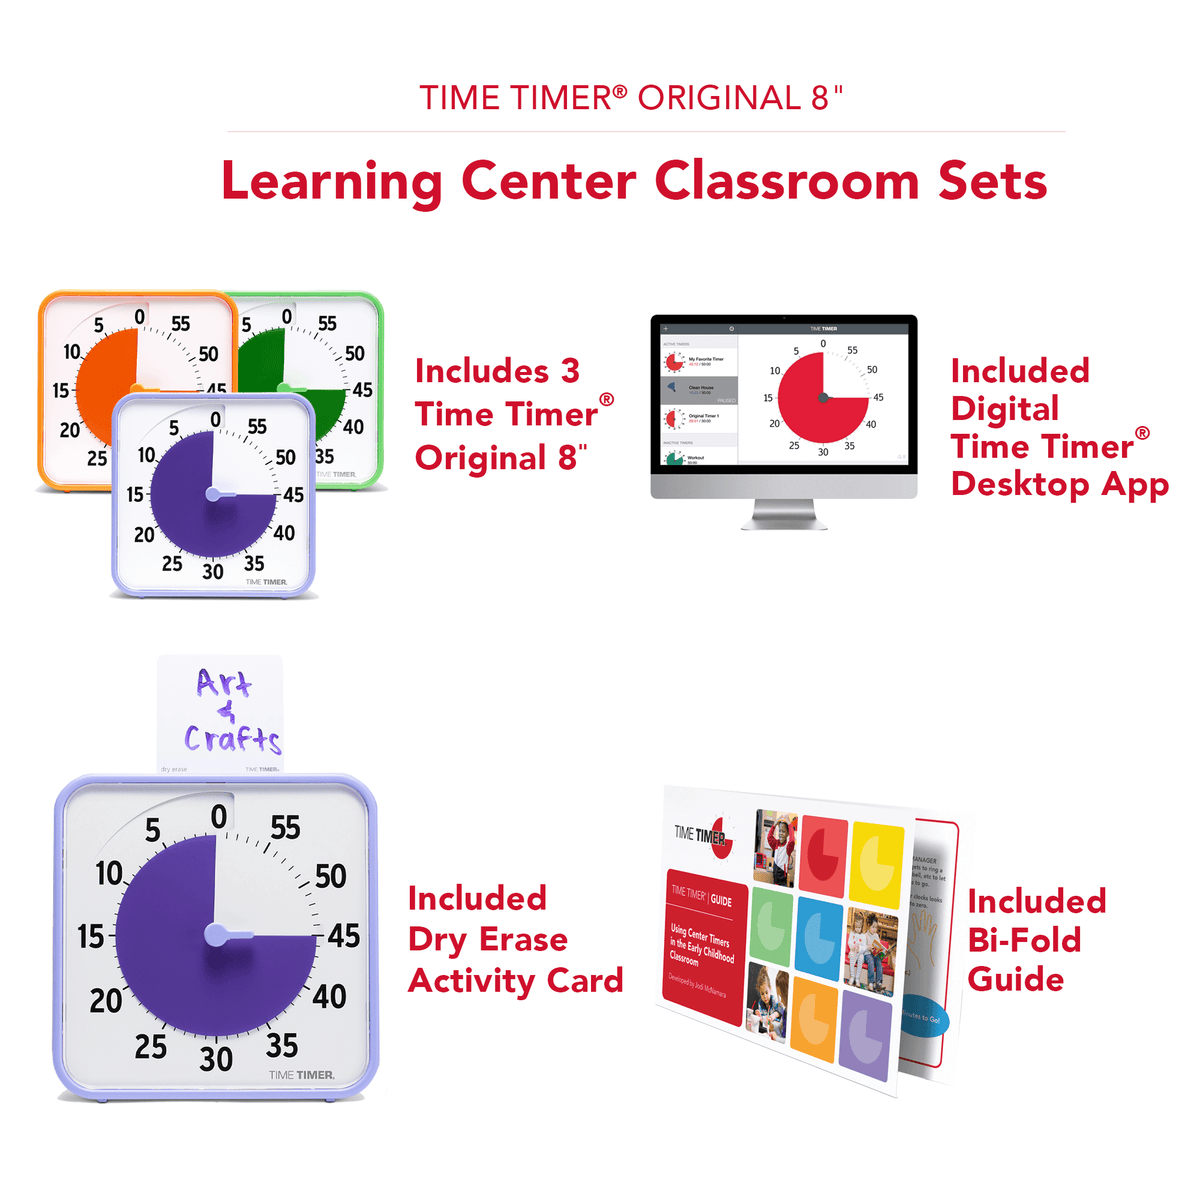 Features of Time Timer Learning Center Classroom Set